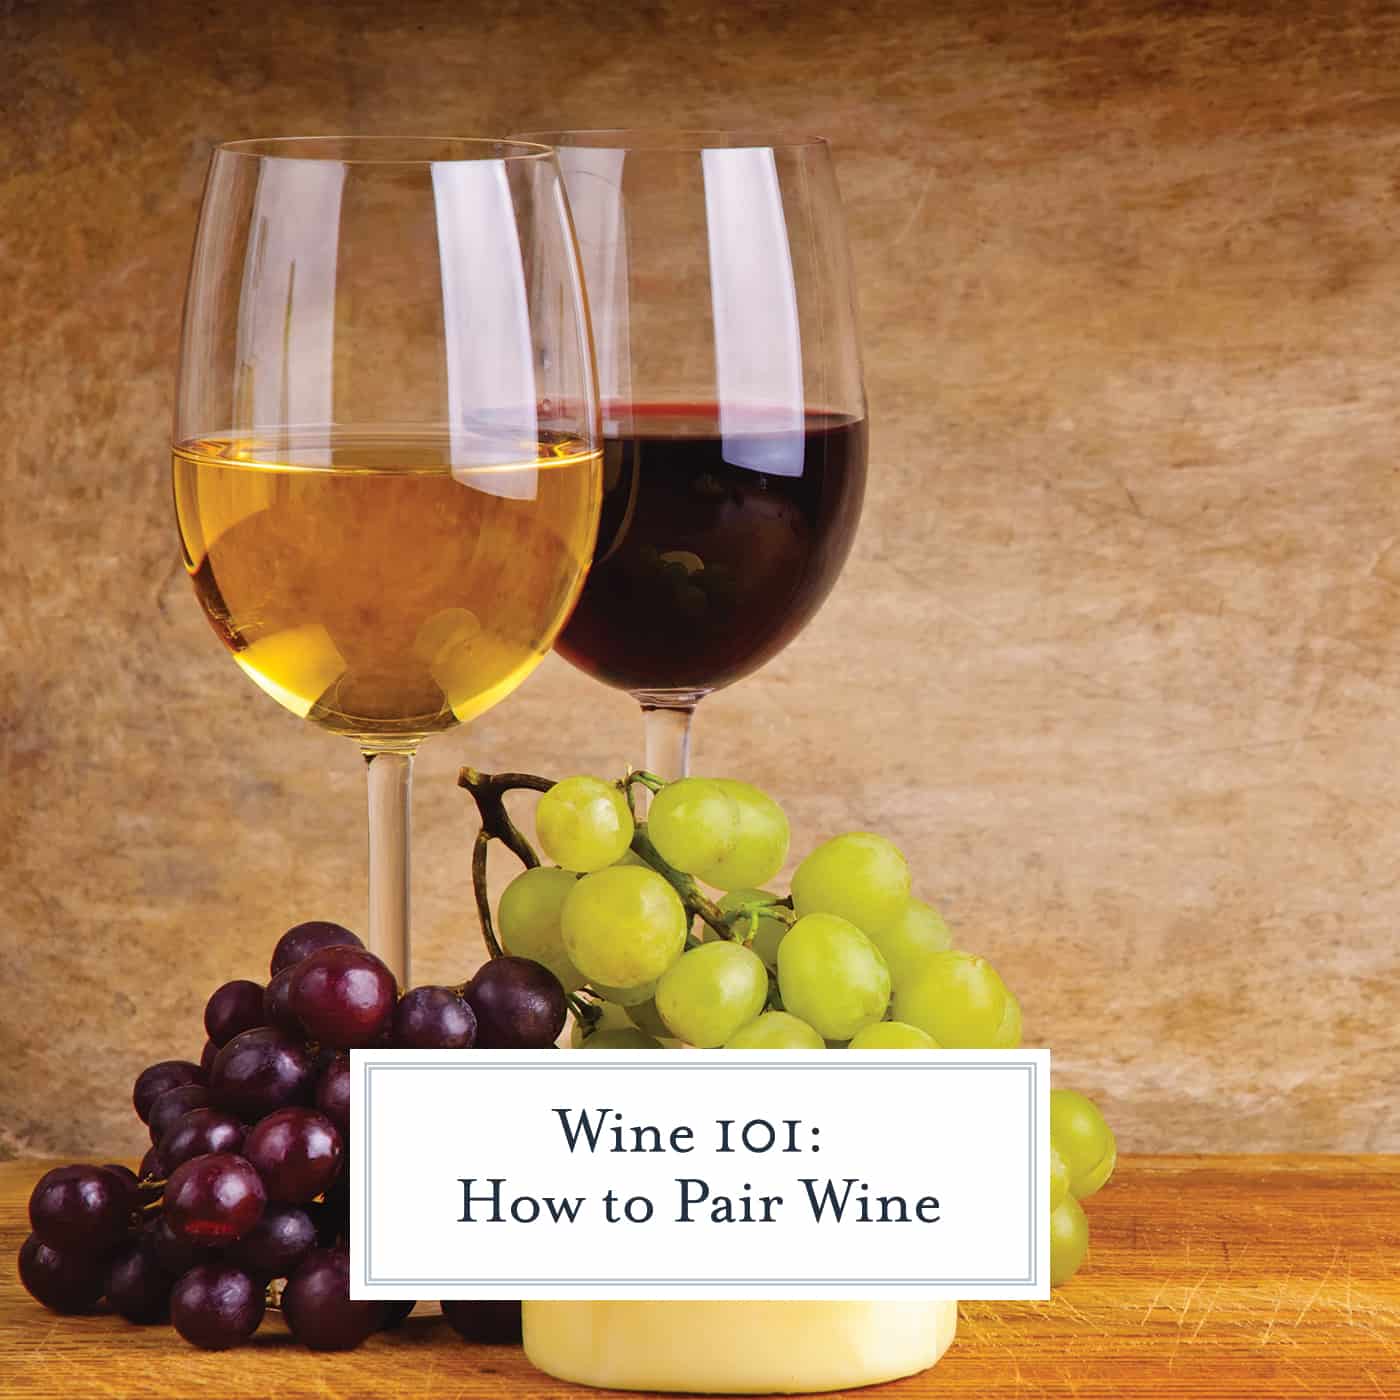 Wine 101: How to expertly pair wine with food without being a sommelier. Learn a few party tricks and pair like a pro! #howtopairwine www.savoryexperiments.com